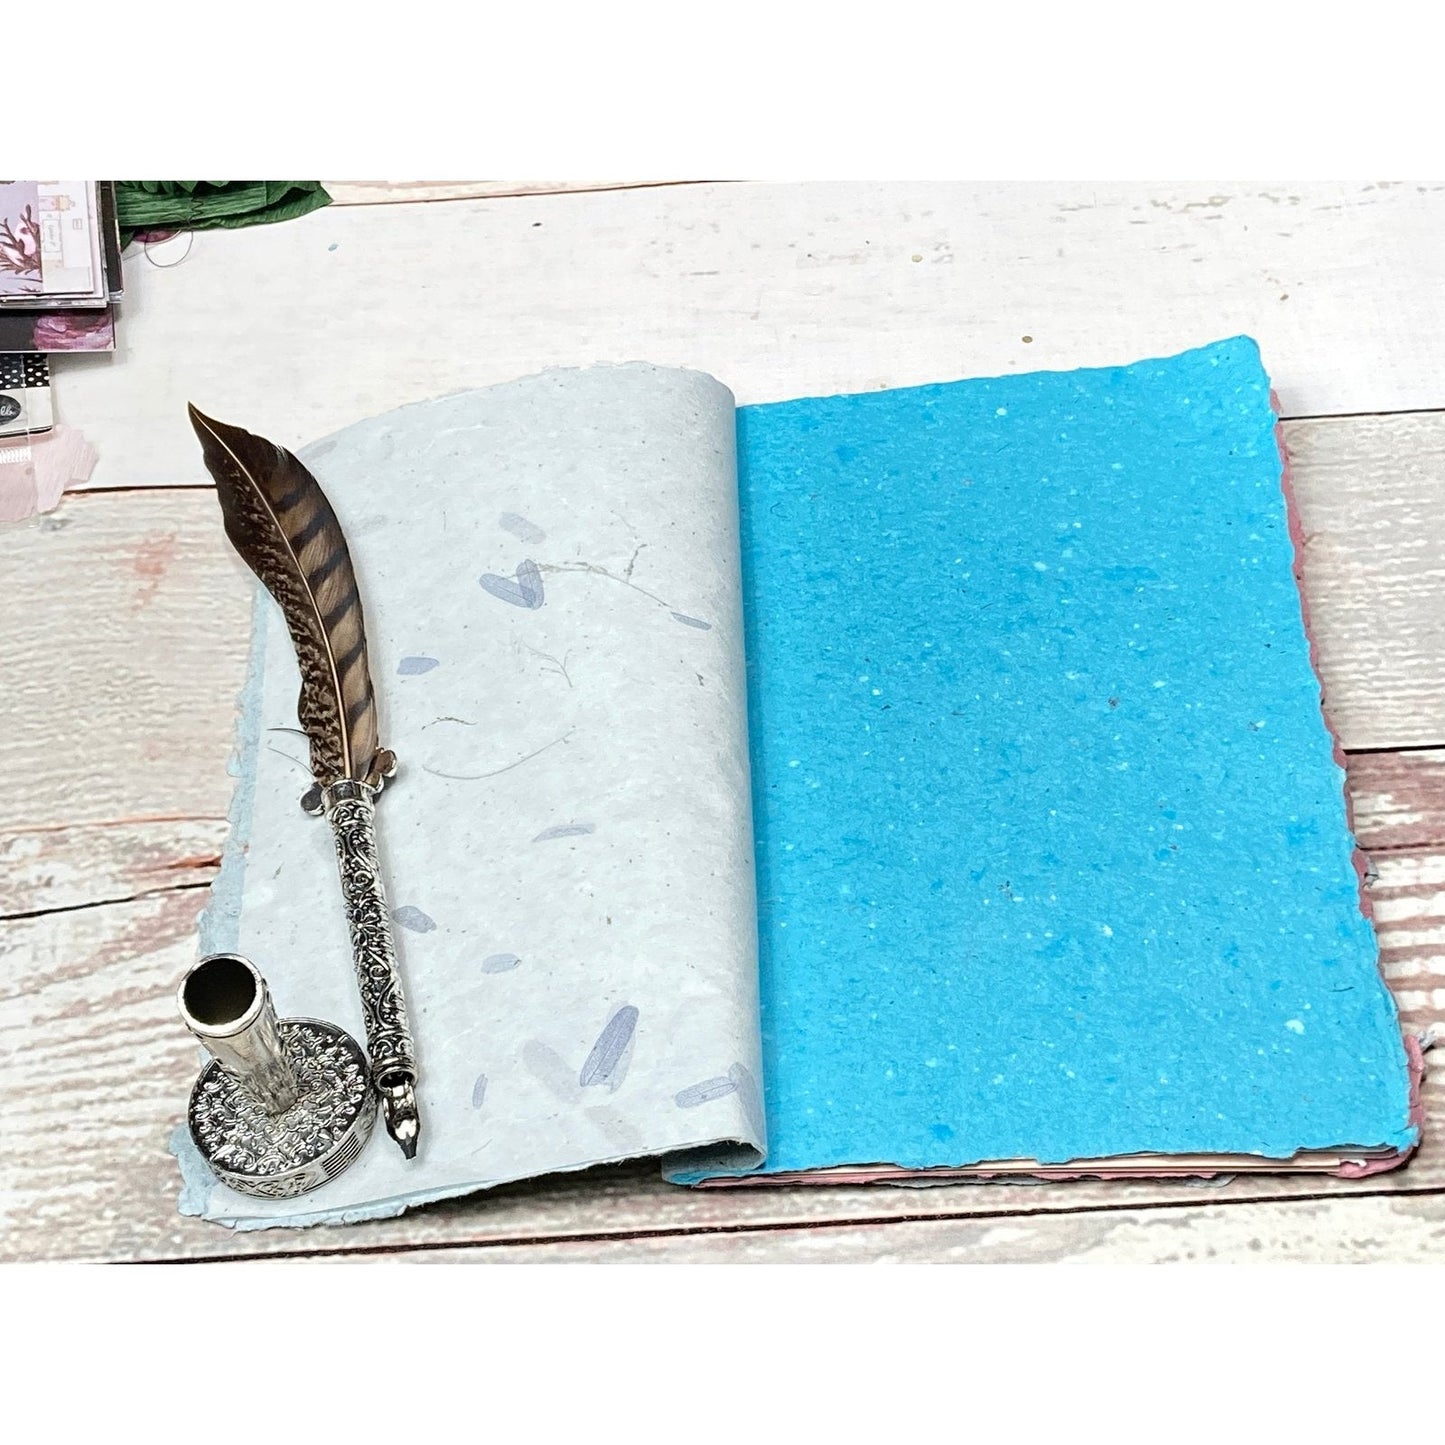 Art Journal with Handmade Paper Cover, Variety of Mixed Media Pages, Hand Sewn Binding with Stick Inserted